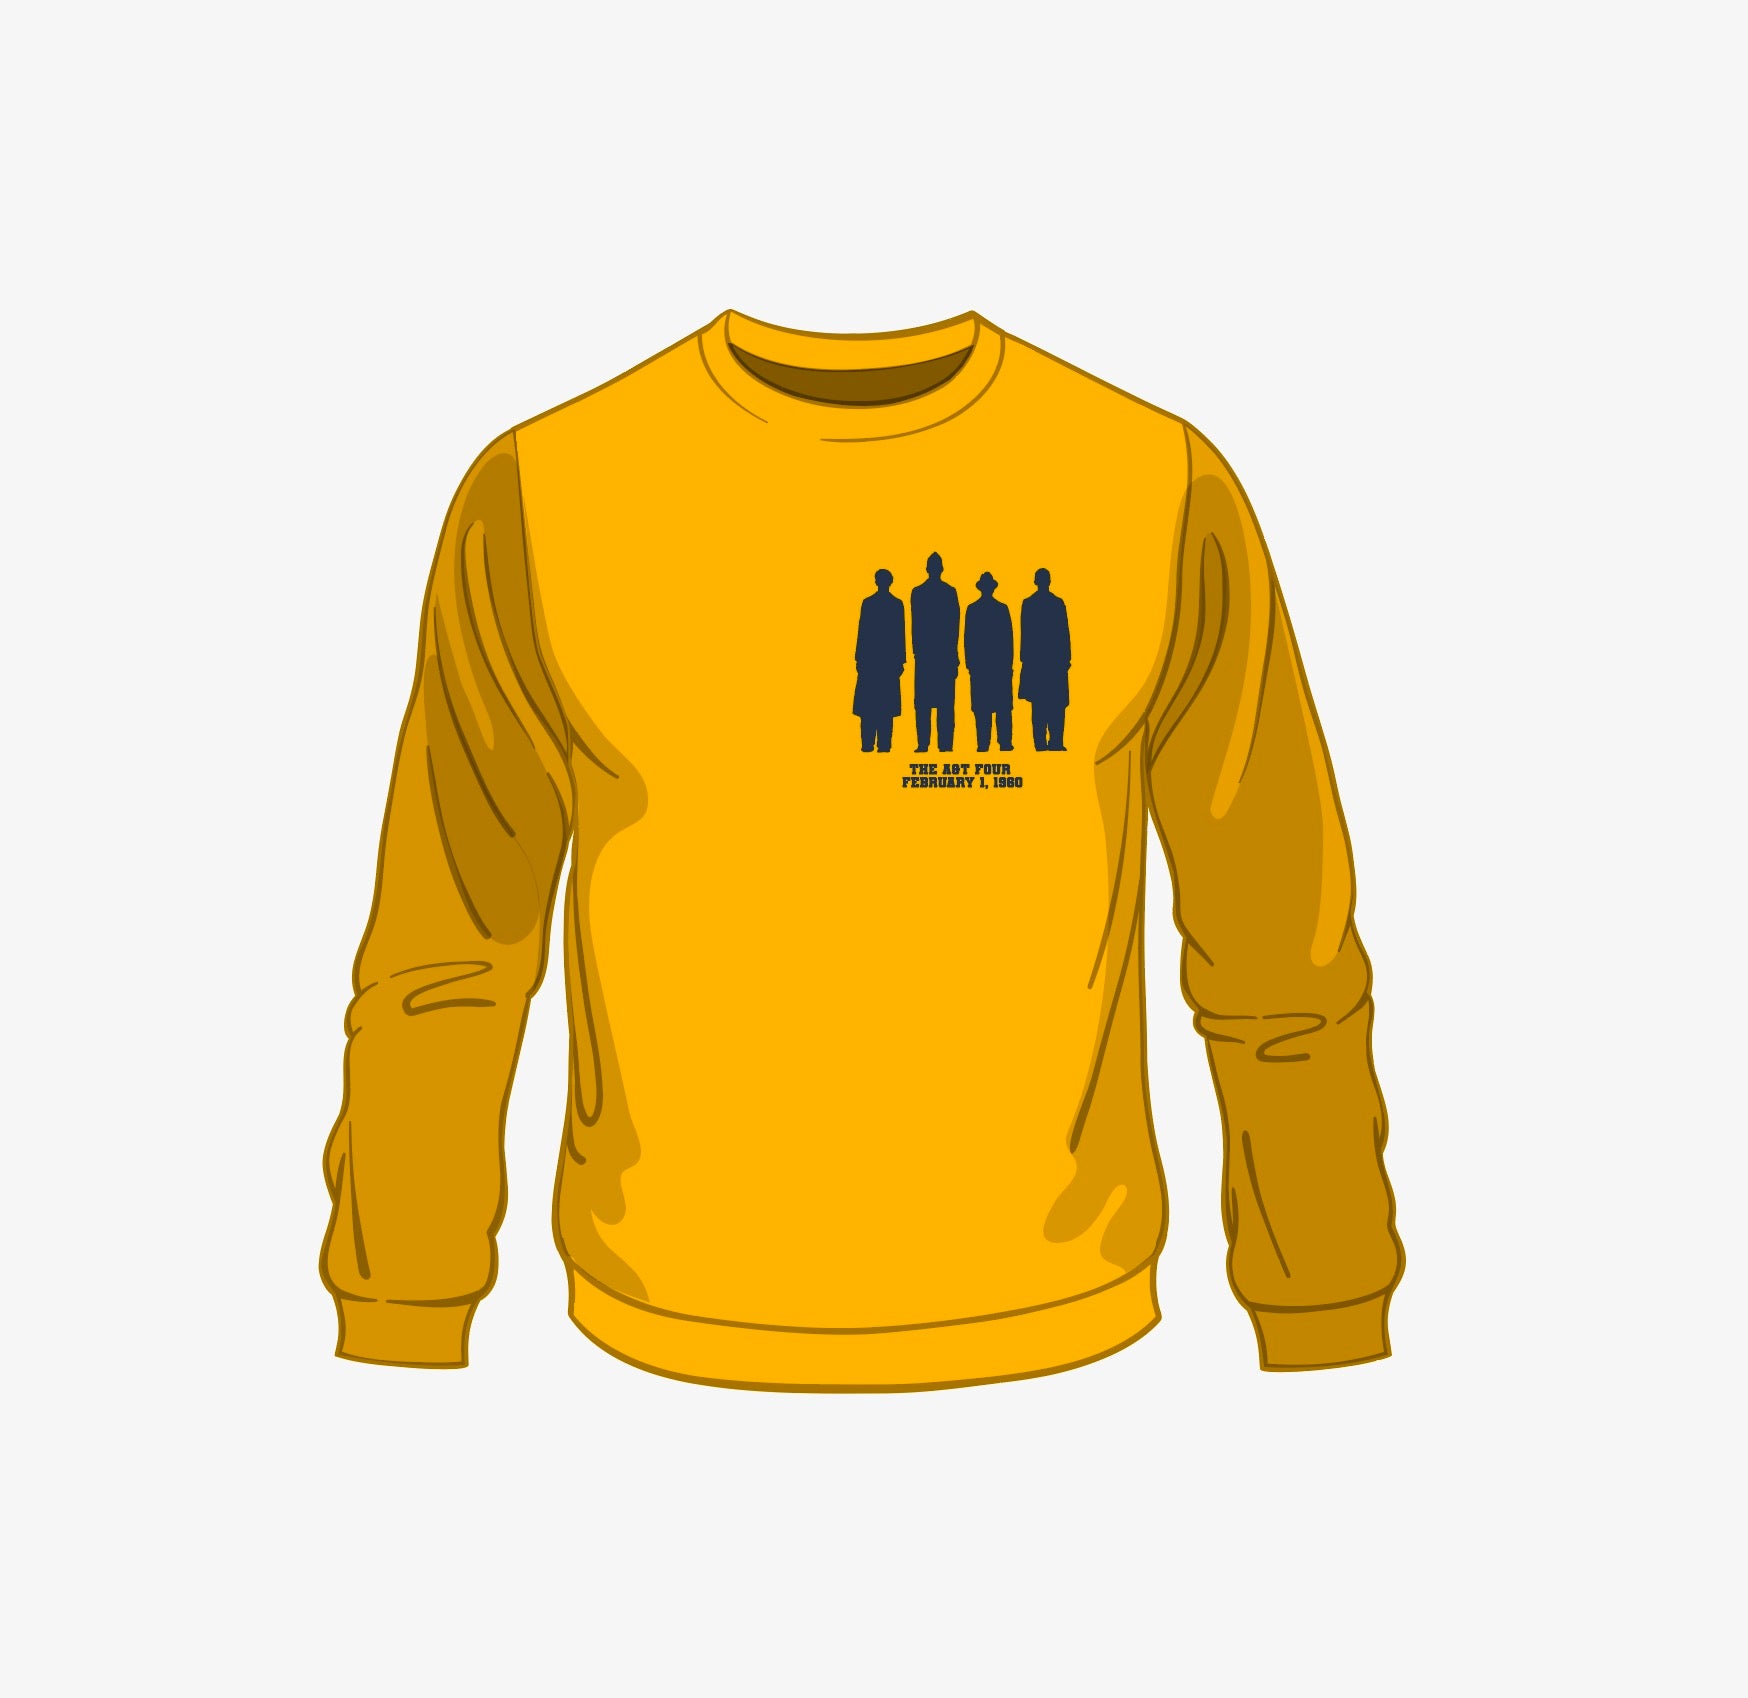 The A&T Four Apparel